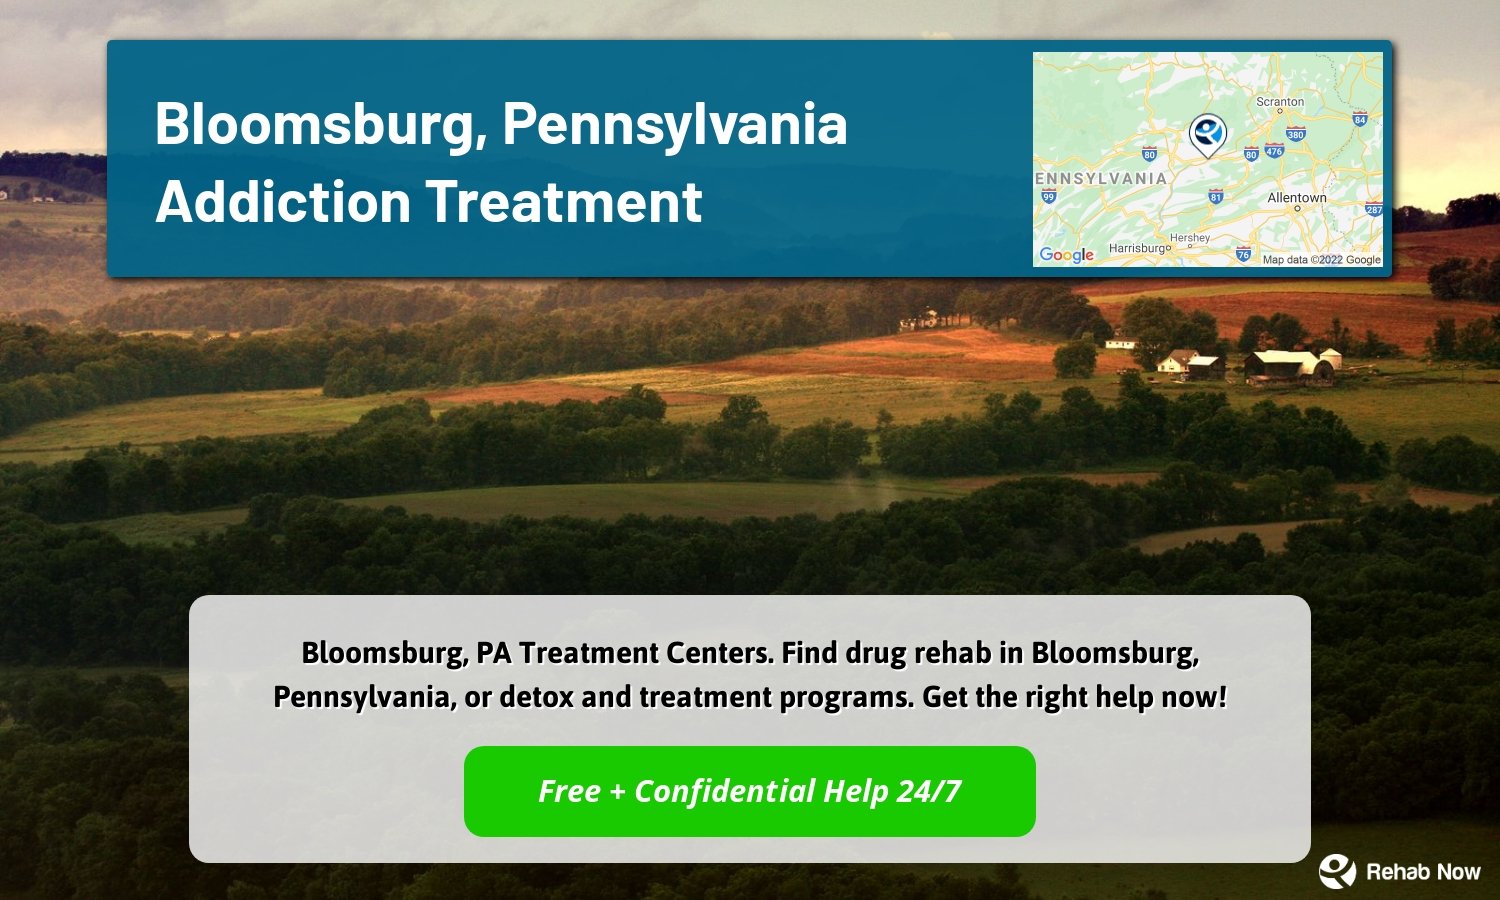 Bloomsburg, PA Treatment Centers. Find drug rehab in Bloomsburg, Pennsylvania, or detox and treatment programs. Get the right help now!